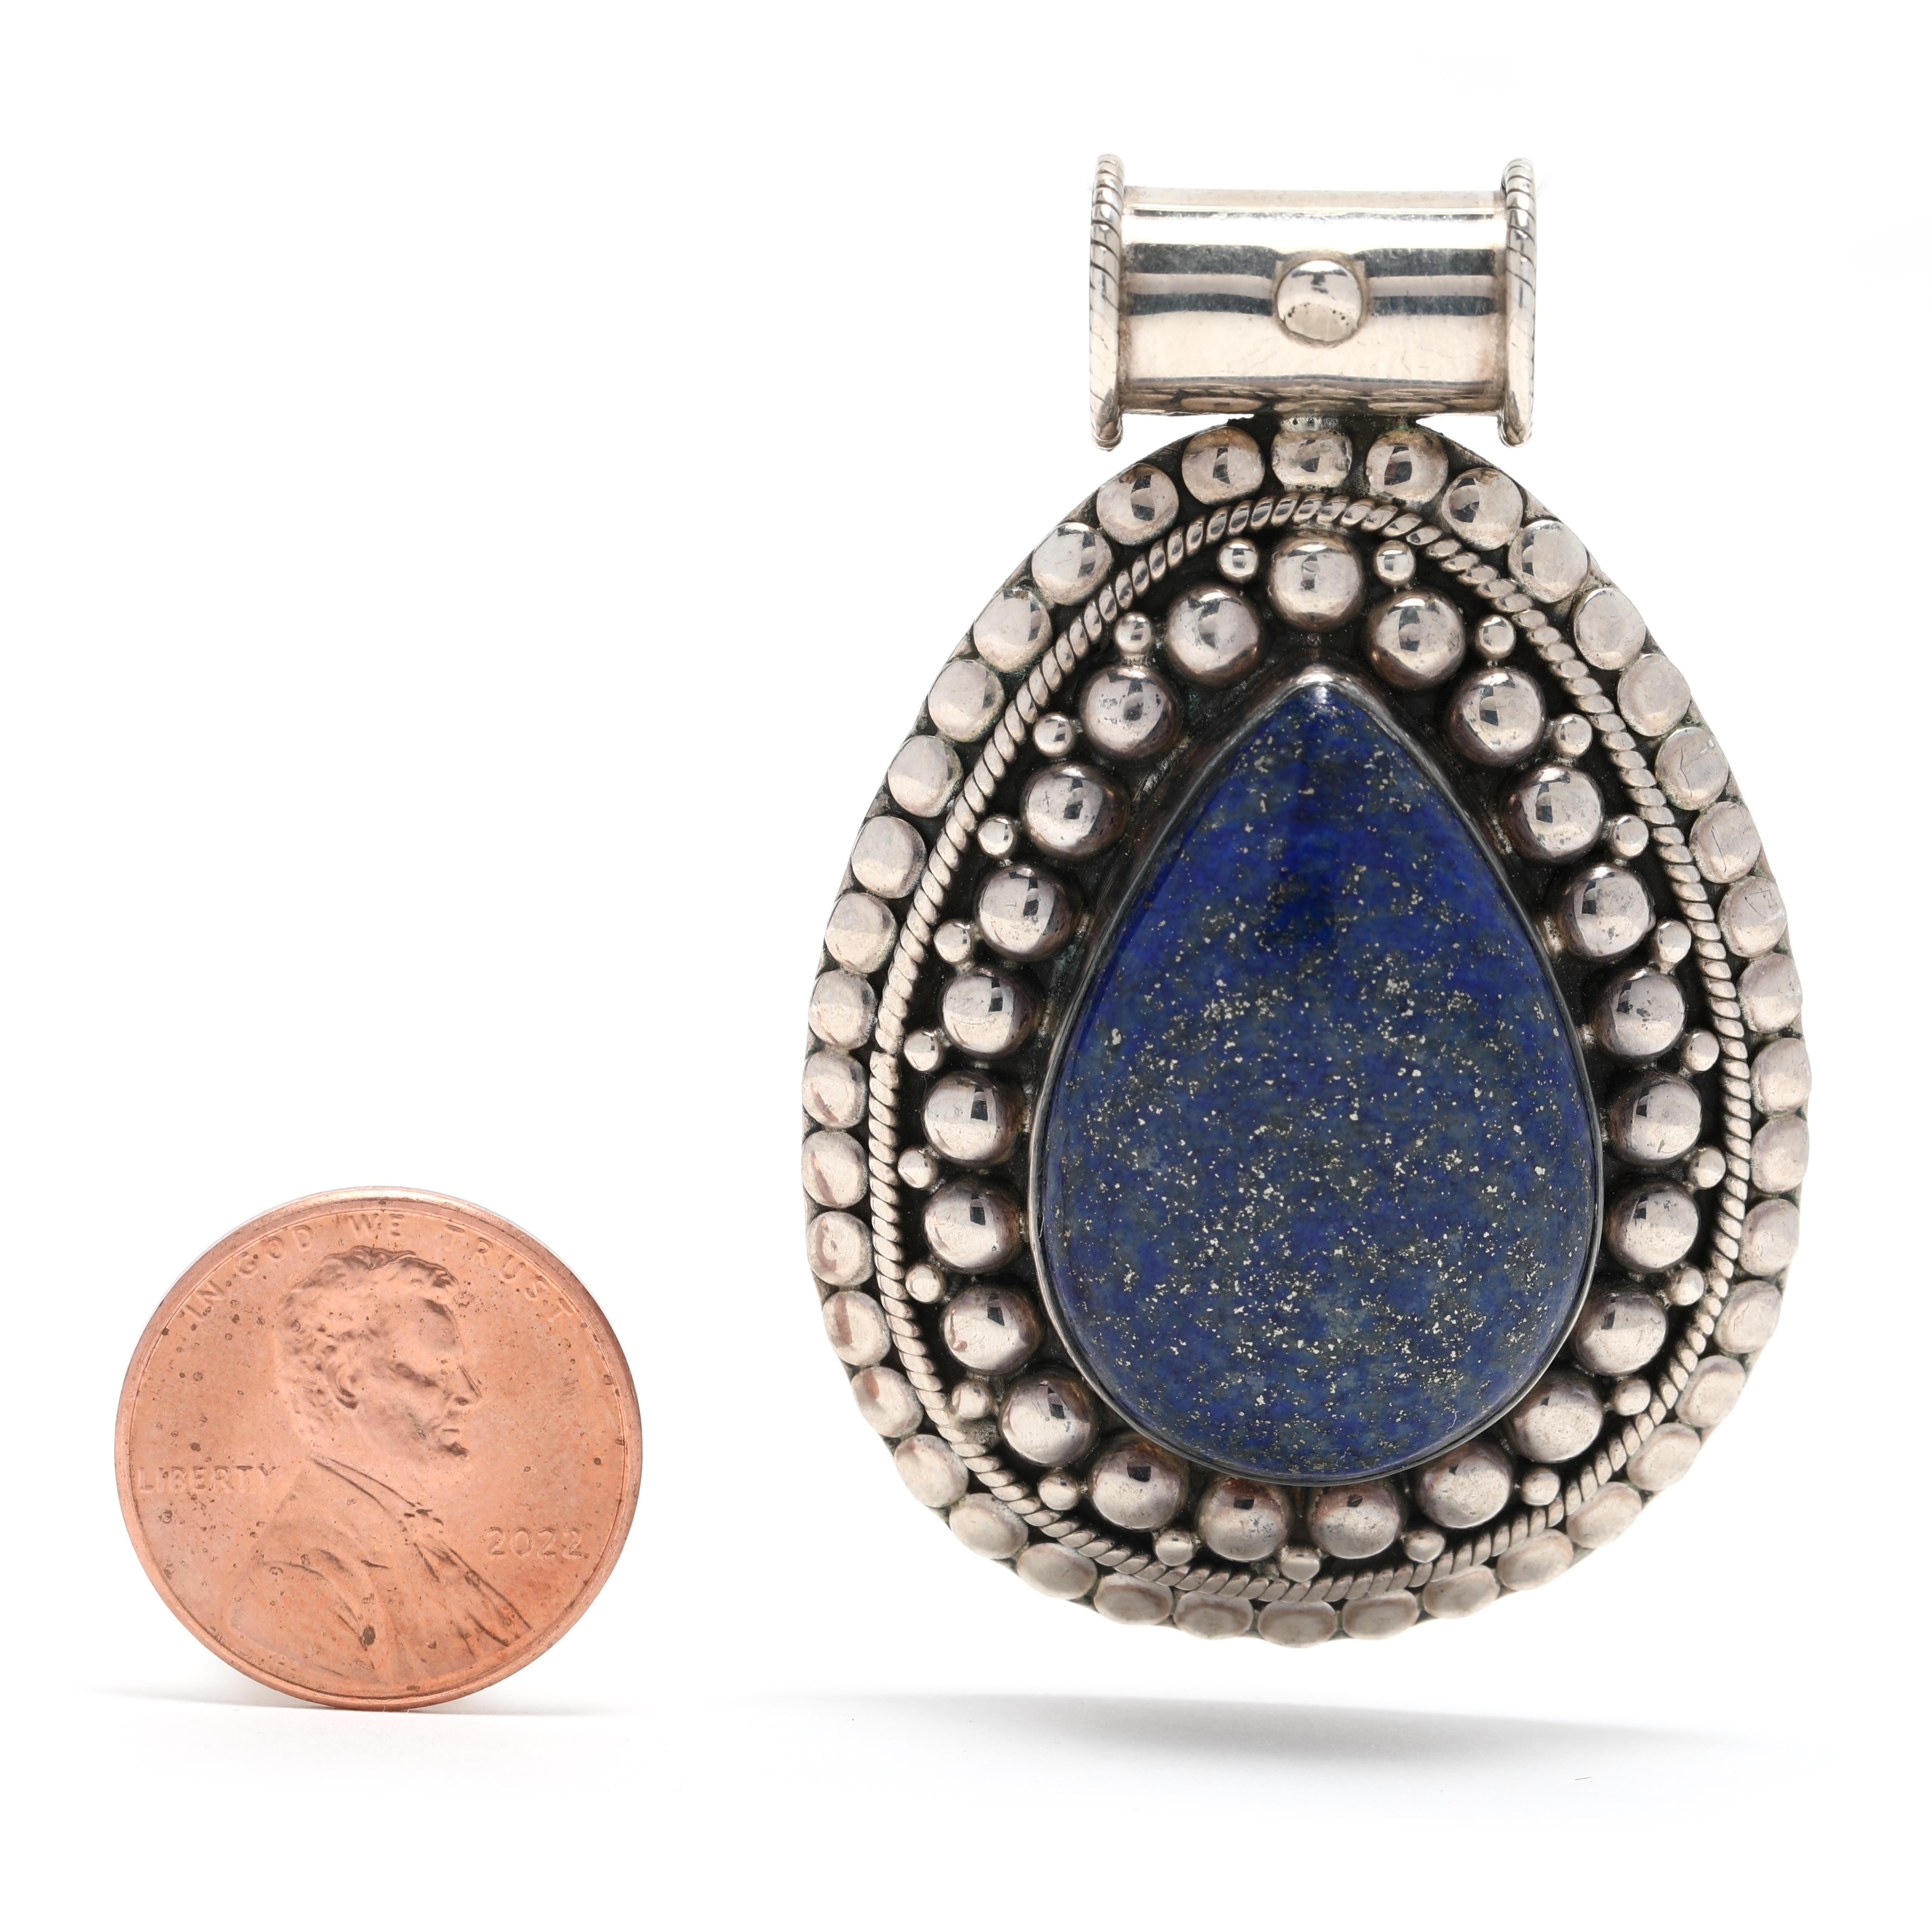 This vintage large teardrop Lapis Lazuli pendant will make a striking statement. The pendant is beaded with natural Lapis Lazuli gemstones and features a sterling silver setting. The pendant measures 2 1/4 inches in length, creating a bold and